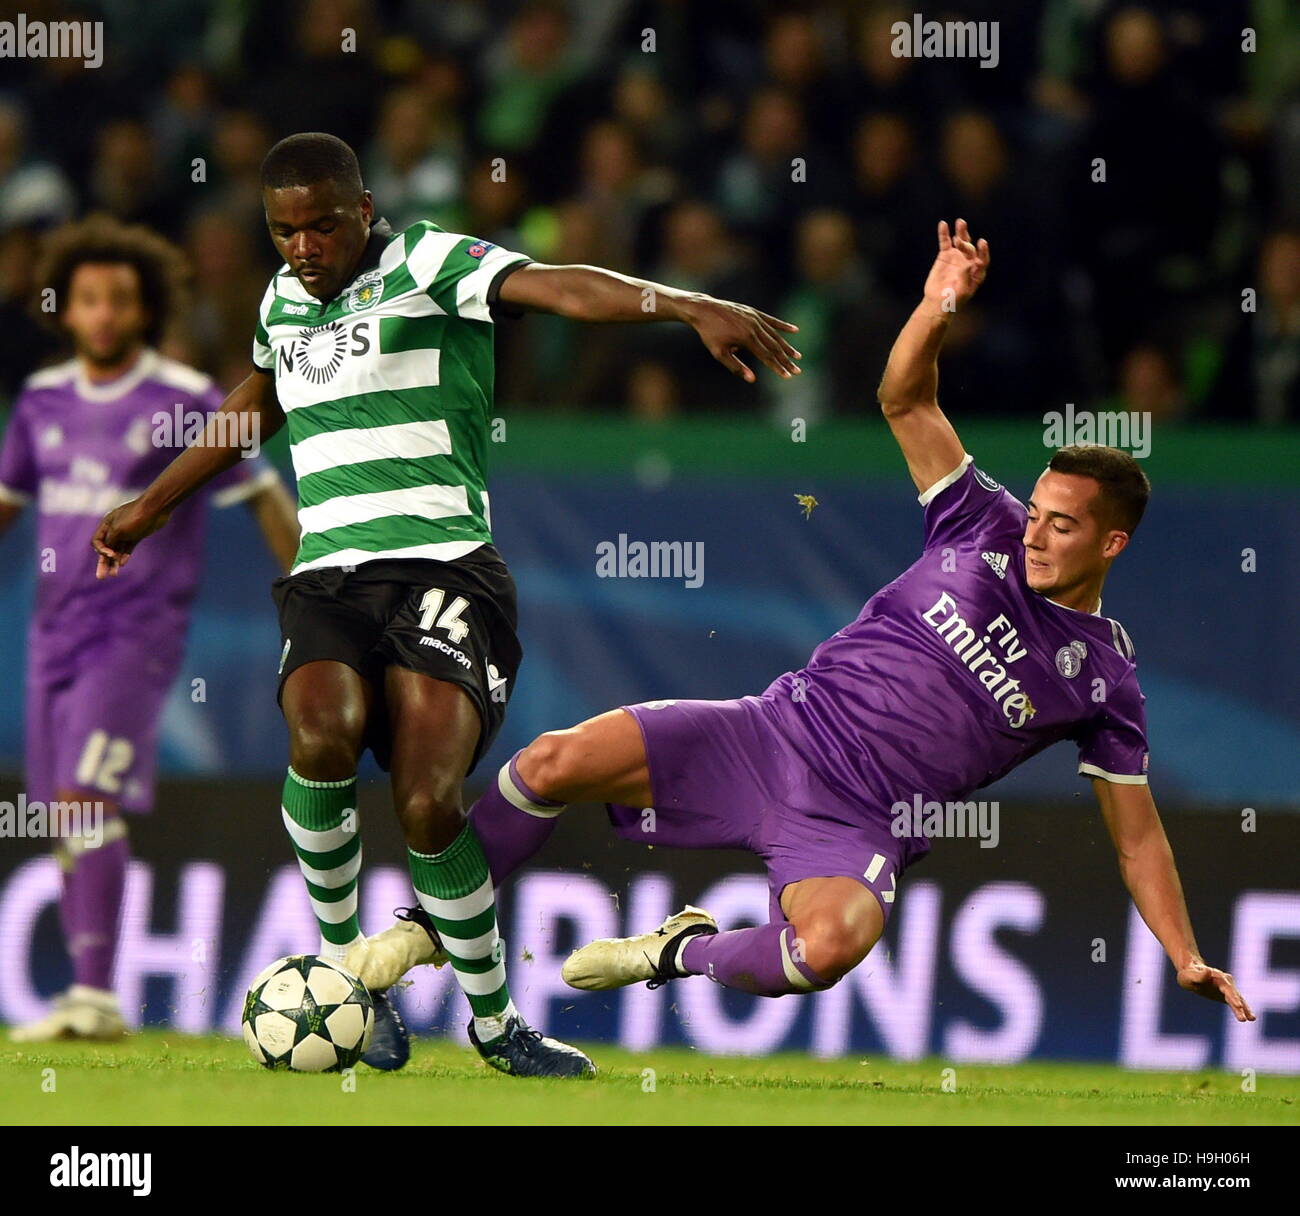 Lisbon, Portugal. 22nd Nov, 2016. Real Madrid's Lucas Vazquez(R) vies with Sporting CP's William Carvalho during the UEFA Champions League Group F soccer match between Sporting CP and Real Madrid CF at Alvalade stadium in Lisbon, Portugal, Nov. 22, 2016. Real Madrid won 2-1. Credit:  Zhang Liyun/Xinhua/Alamy Live News Stock Photo